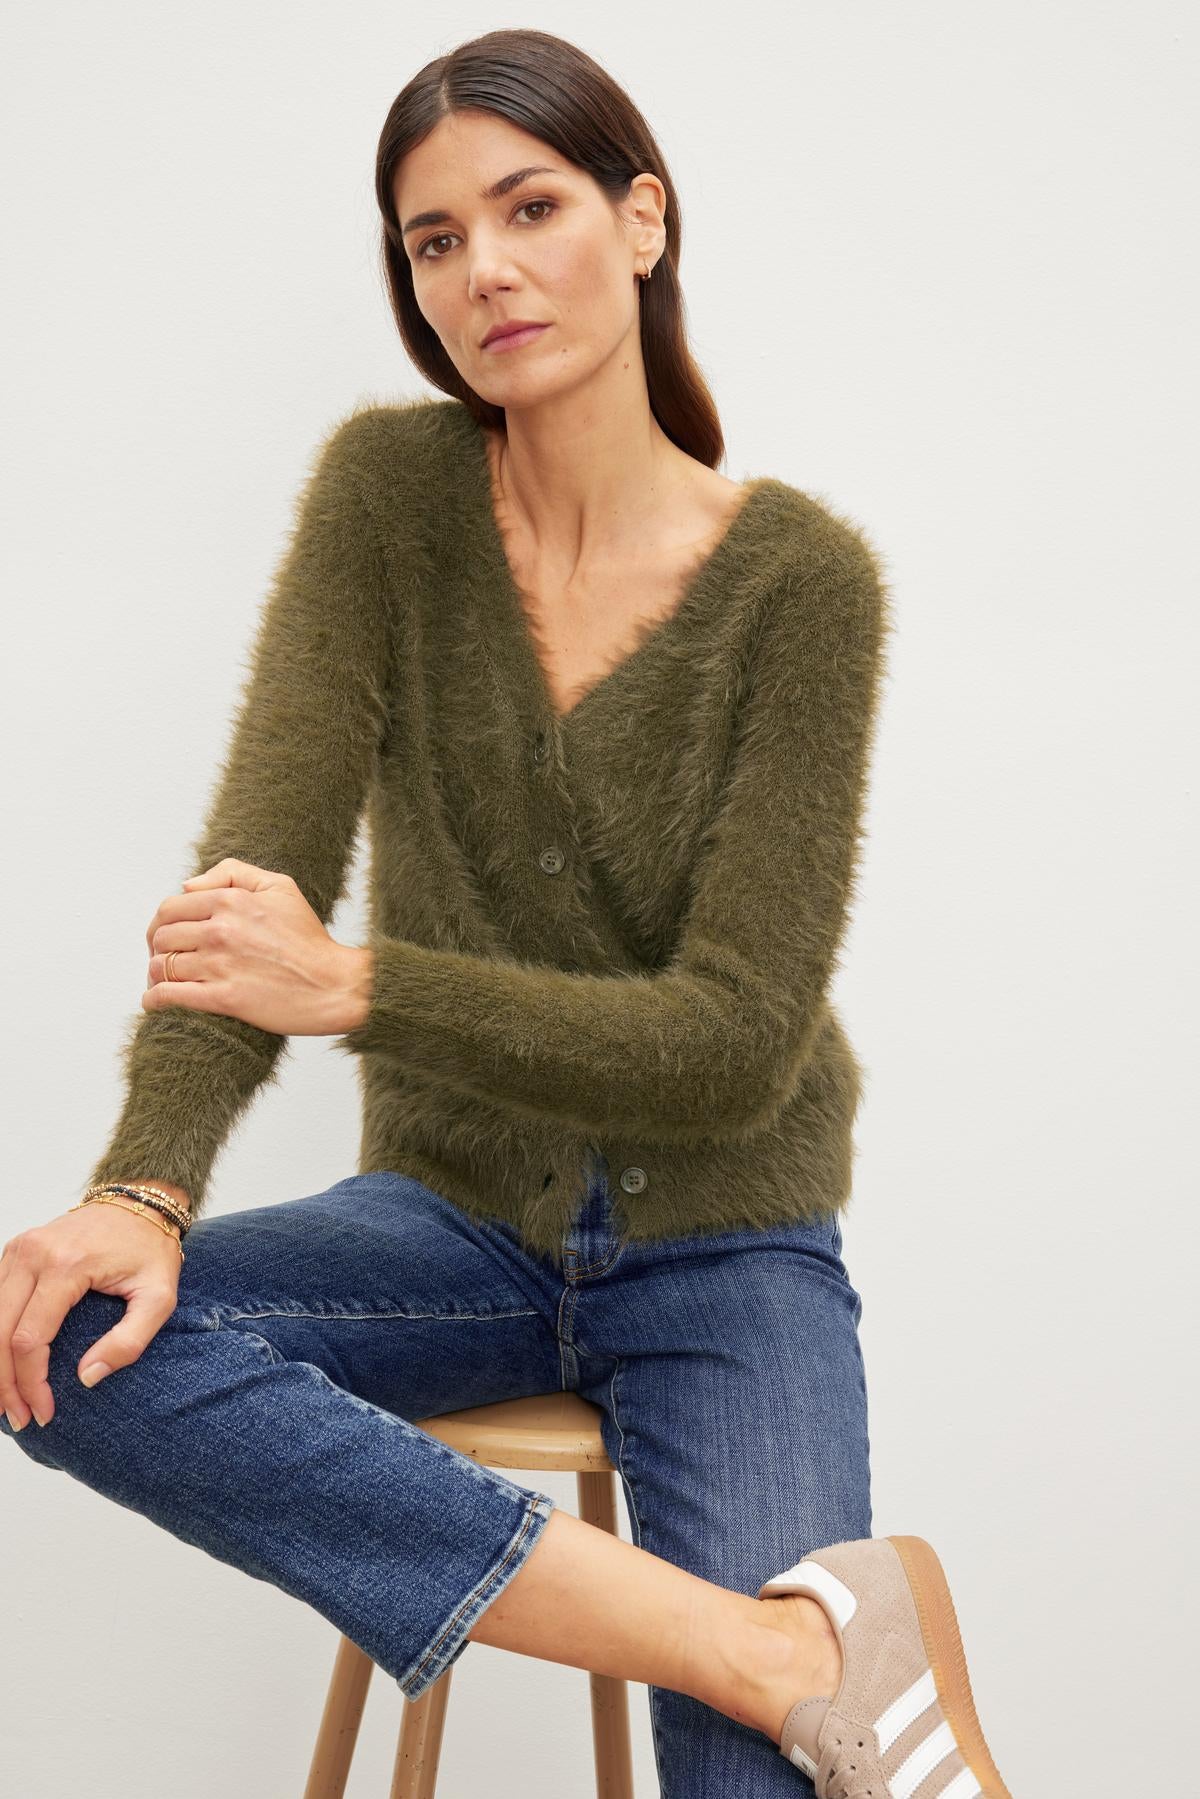 A woman is sitting on a stool wearing jeans and a soft green ELLE FEATHER YARN CARDIGAN made by Velvet by Graham & Spencer.-35630370488513